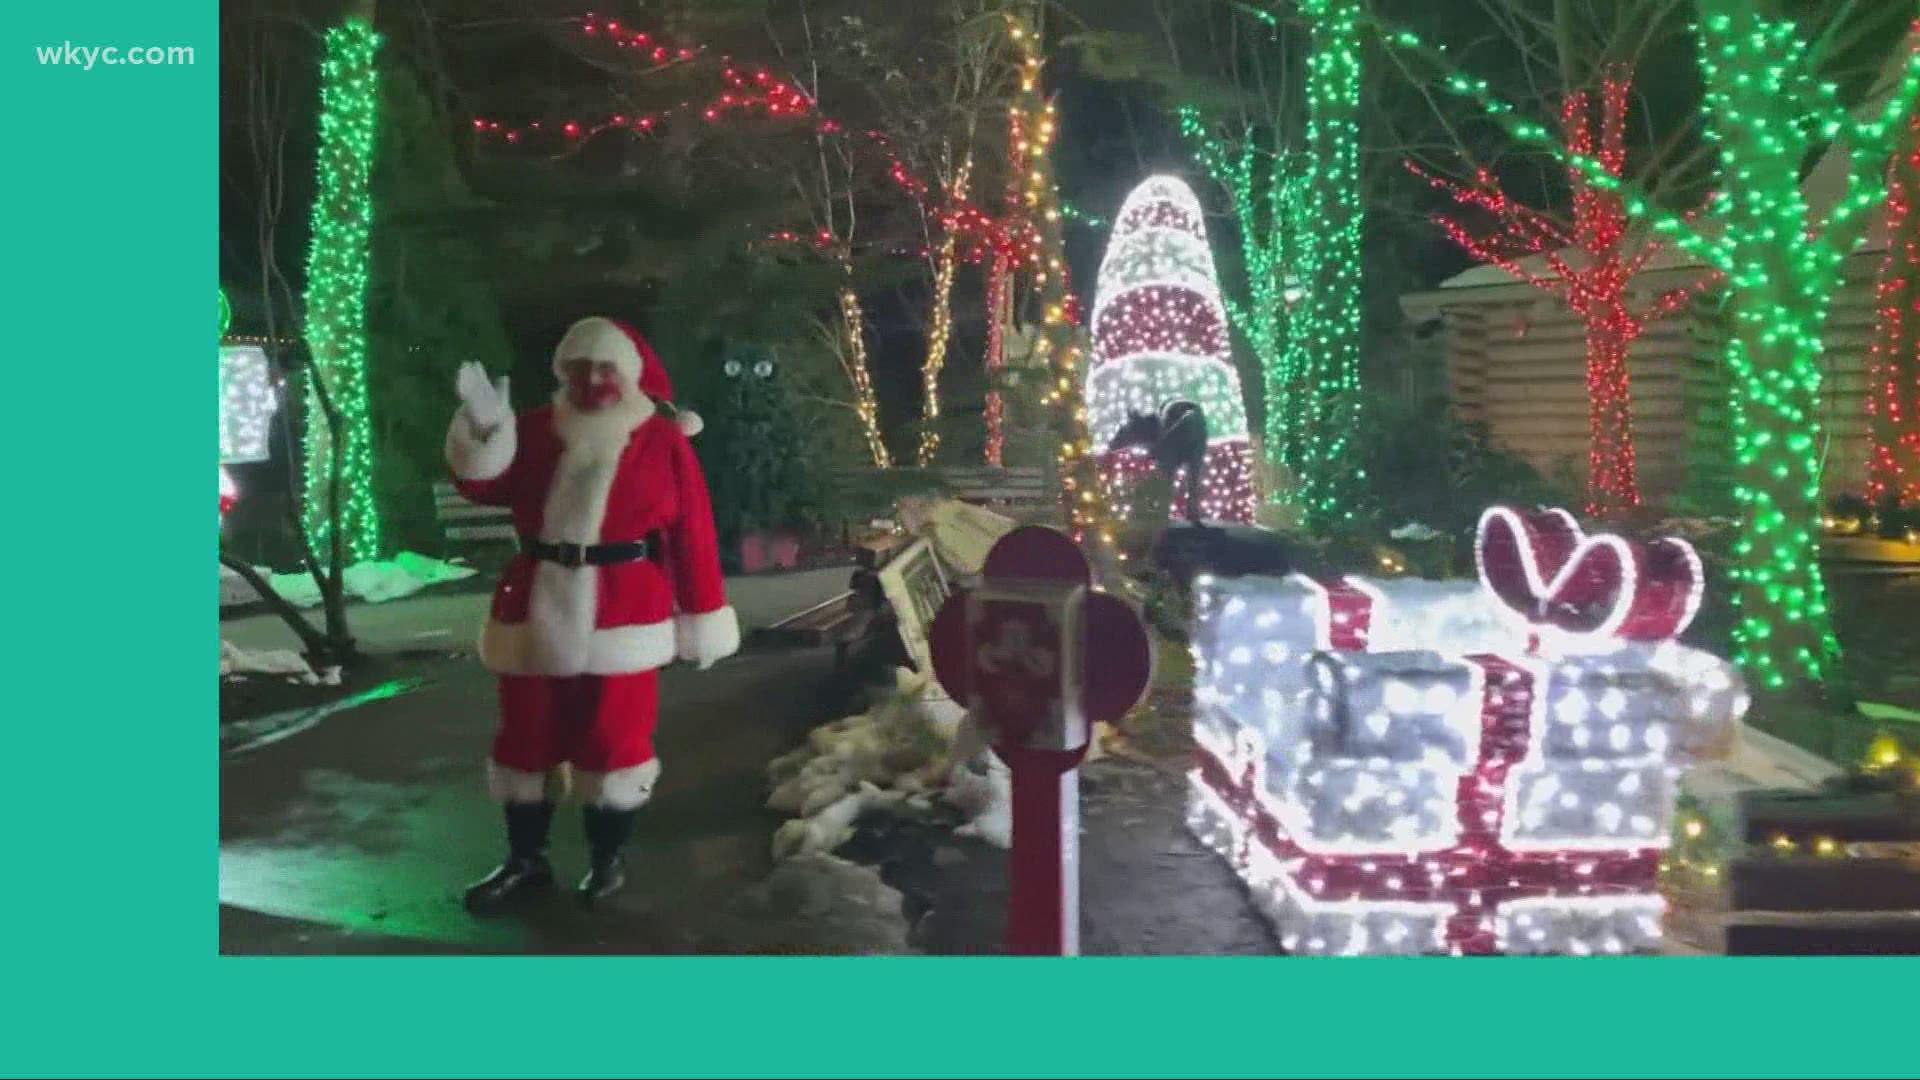 Looking for something the whole family can enjoy this holiday season? 3News' Matt Standridge shows what you can expect at the Cleveland Zoo's Wild Winter Lights.